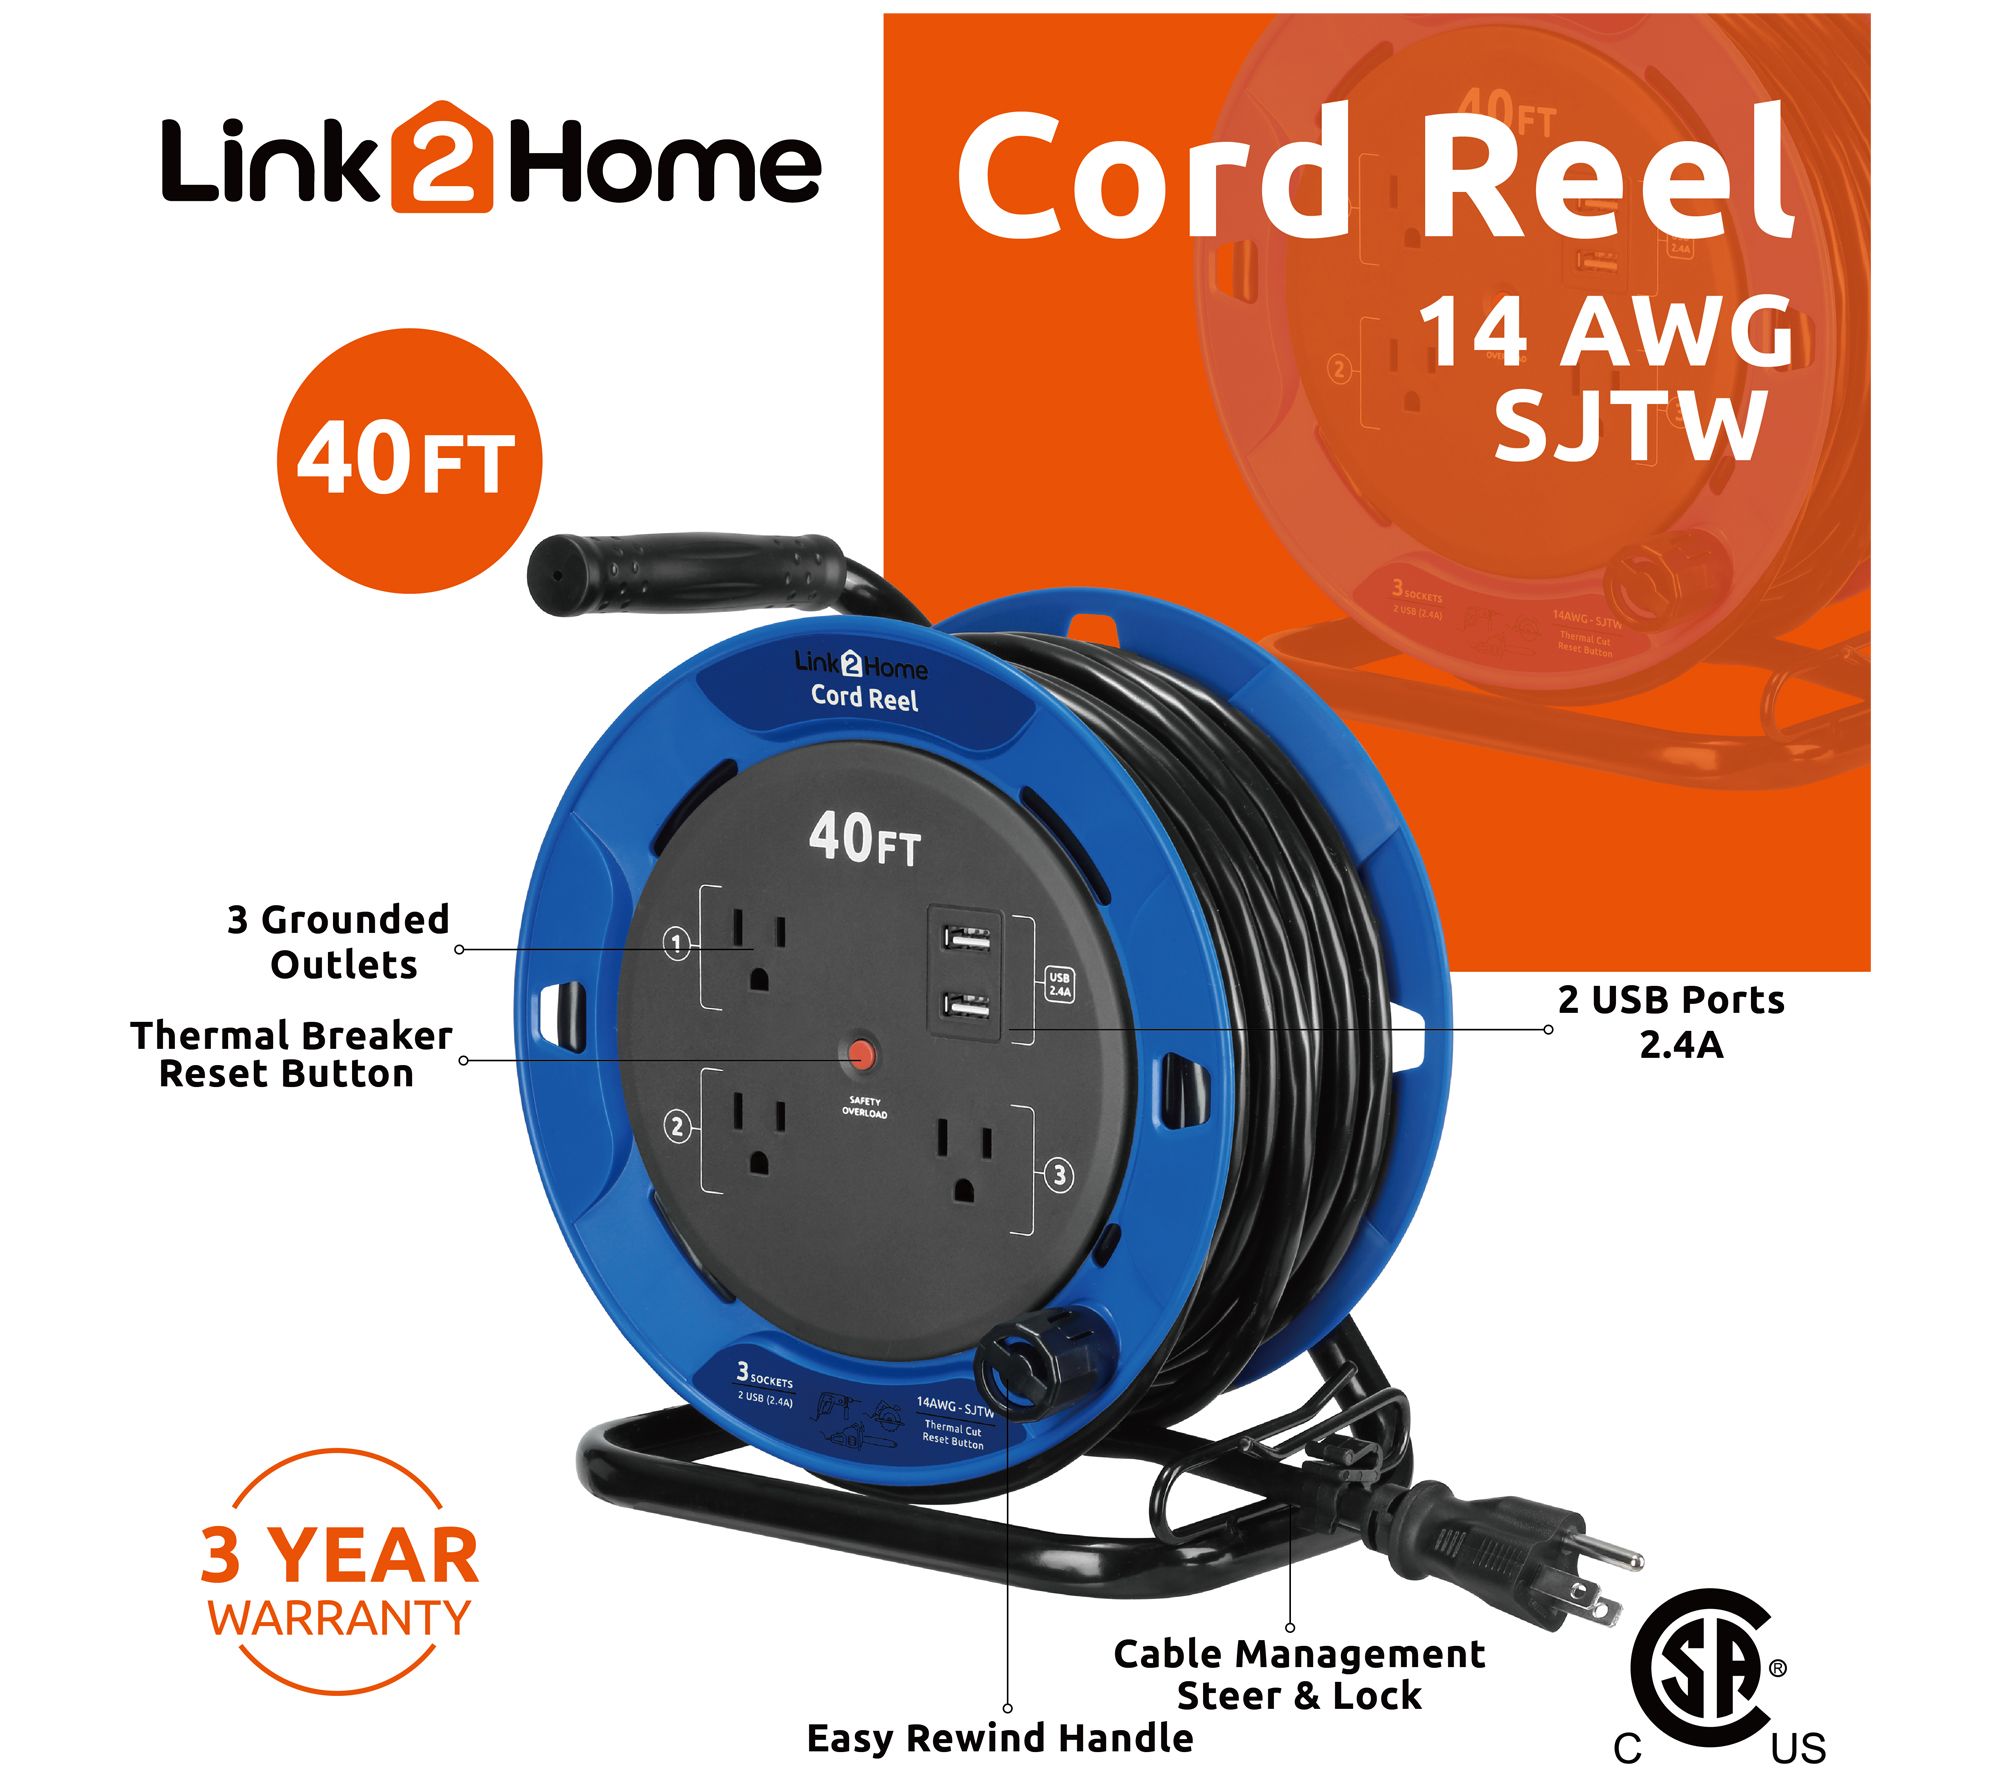 Link2Home Cord Reel Extension Cord 4 Power Outlets – 14 AWG SJTW Cable. 